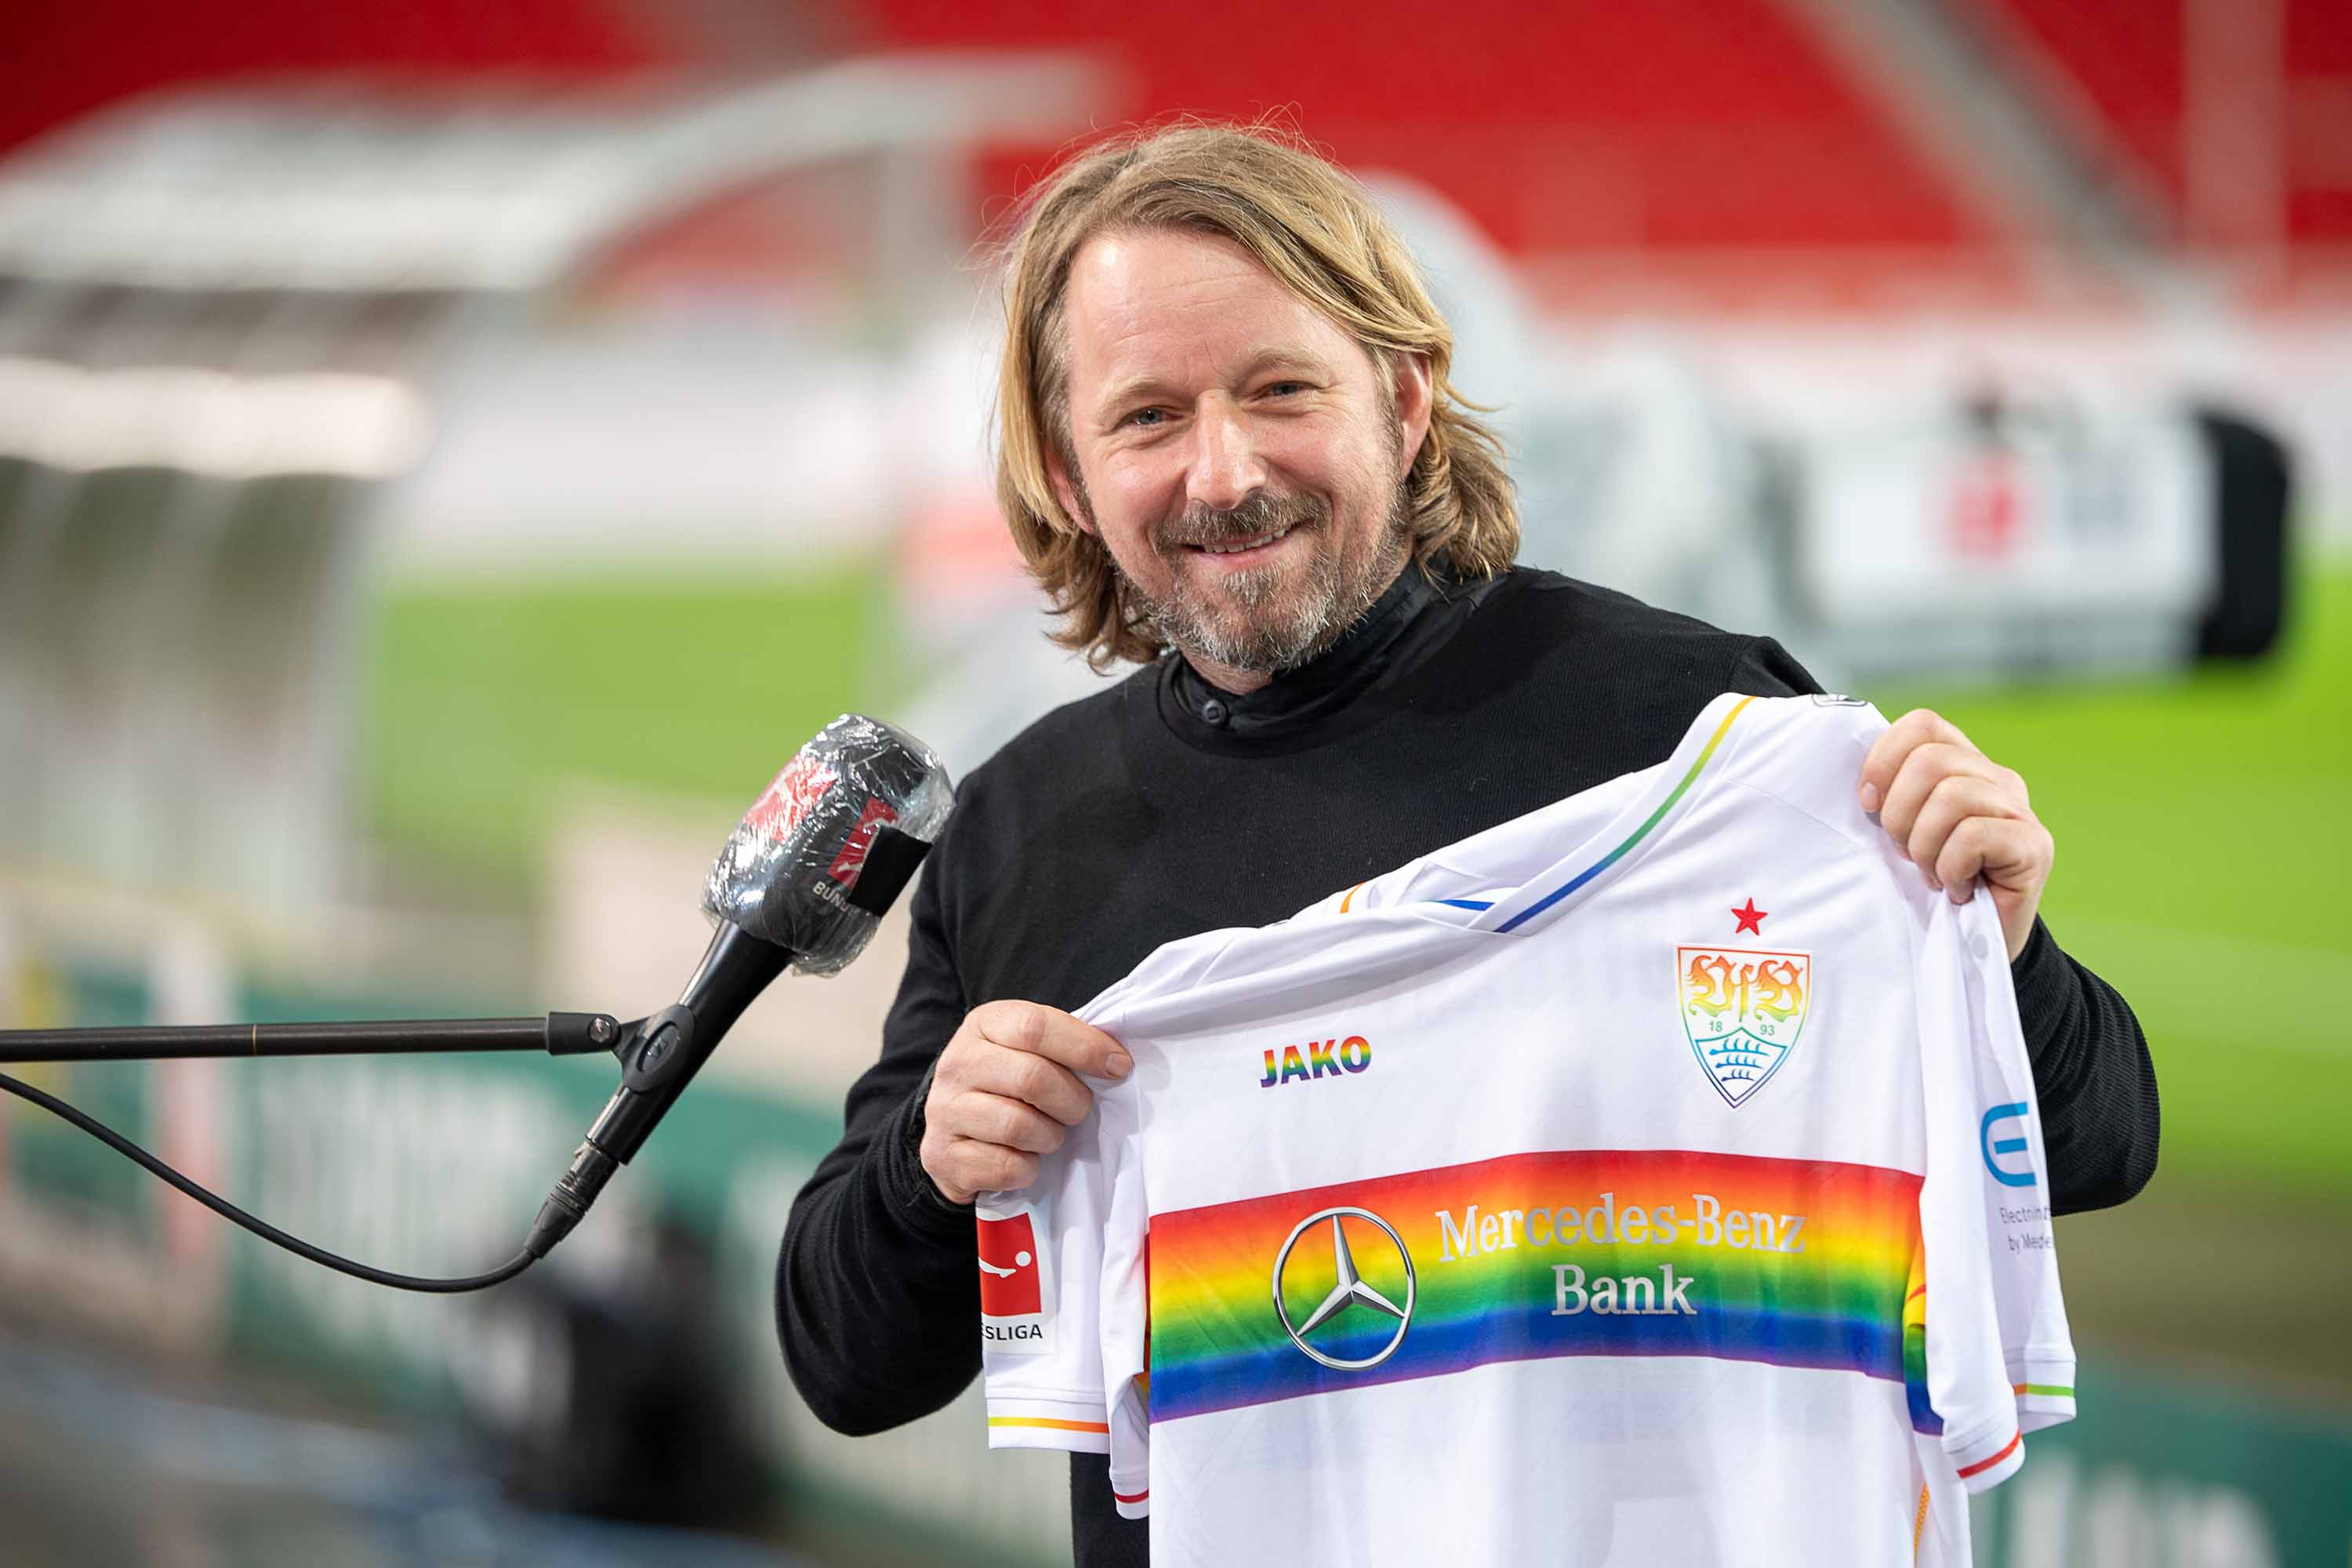 Germany supported LGBTQ people, making the UEFA look foolish - Outsports